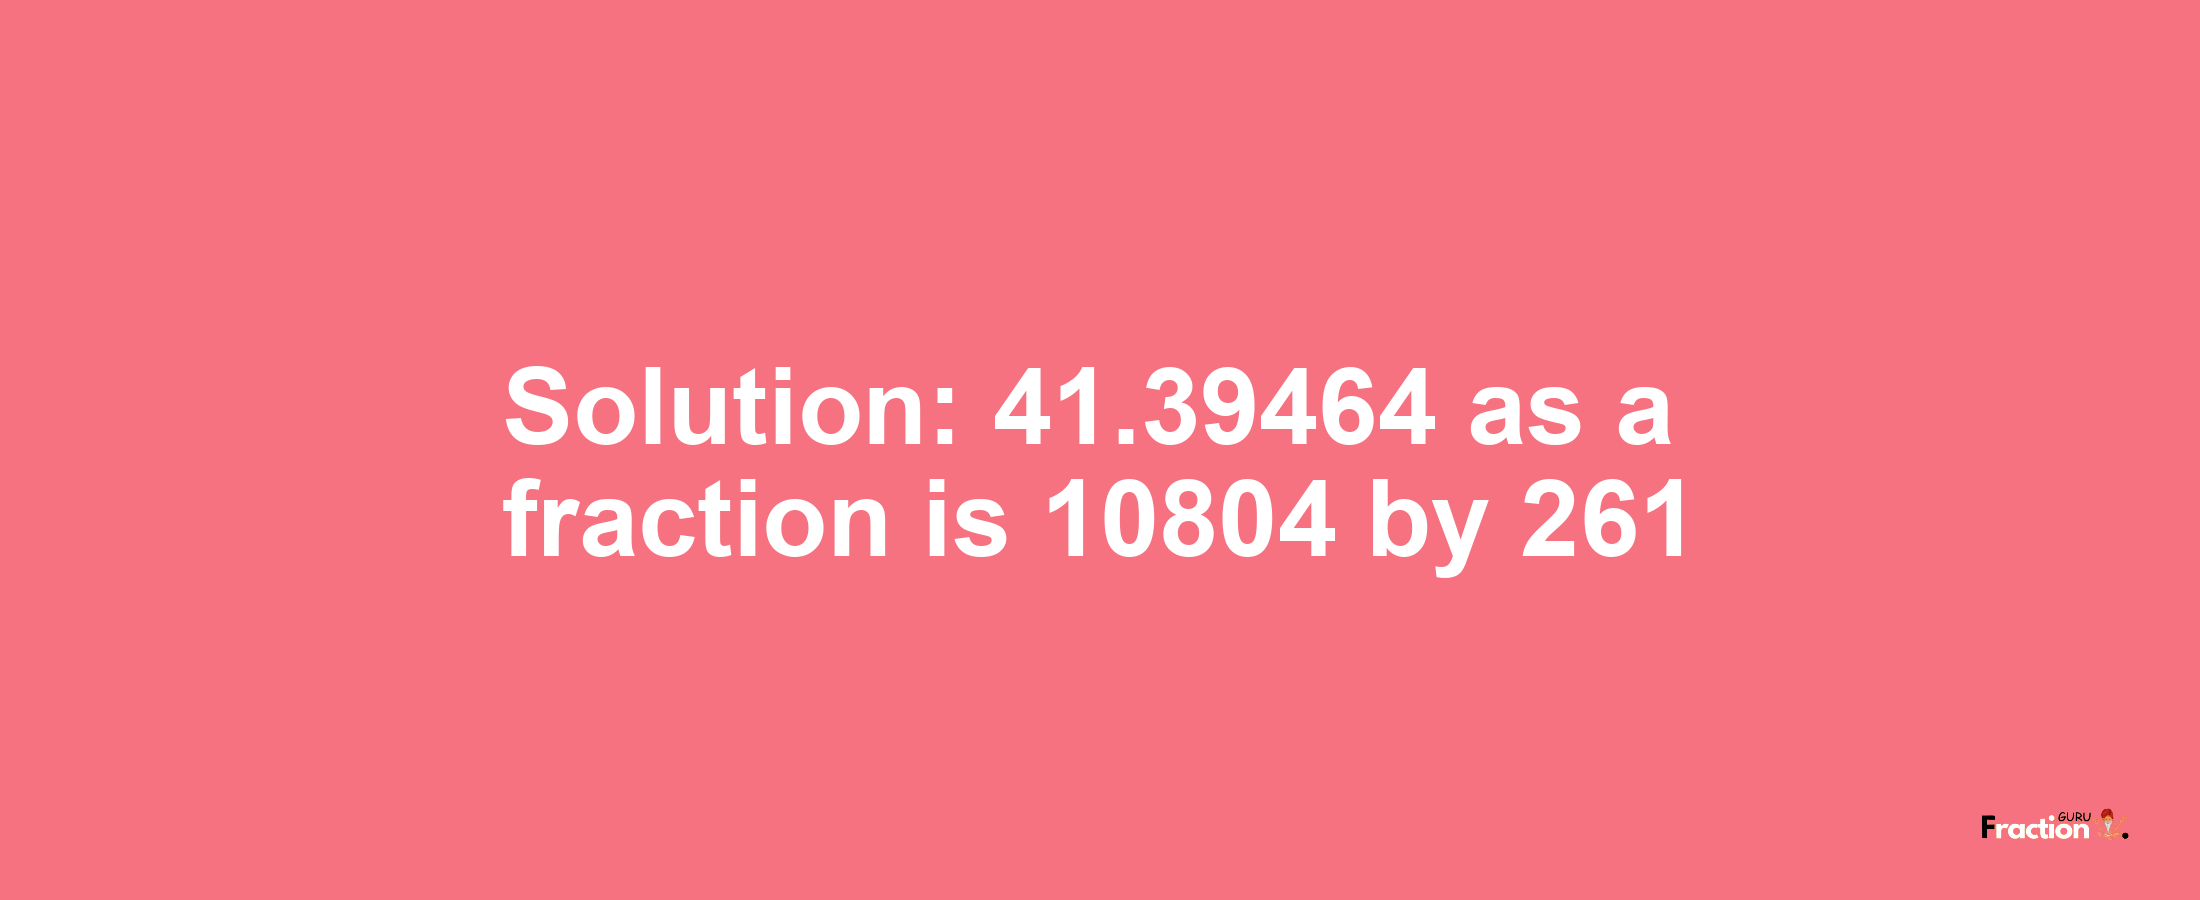 Solution:41.39464 as a fraction is 10804/261